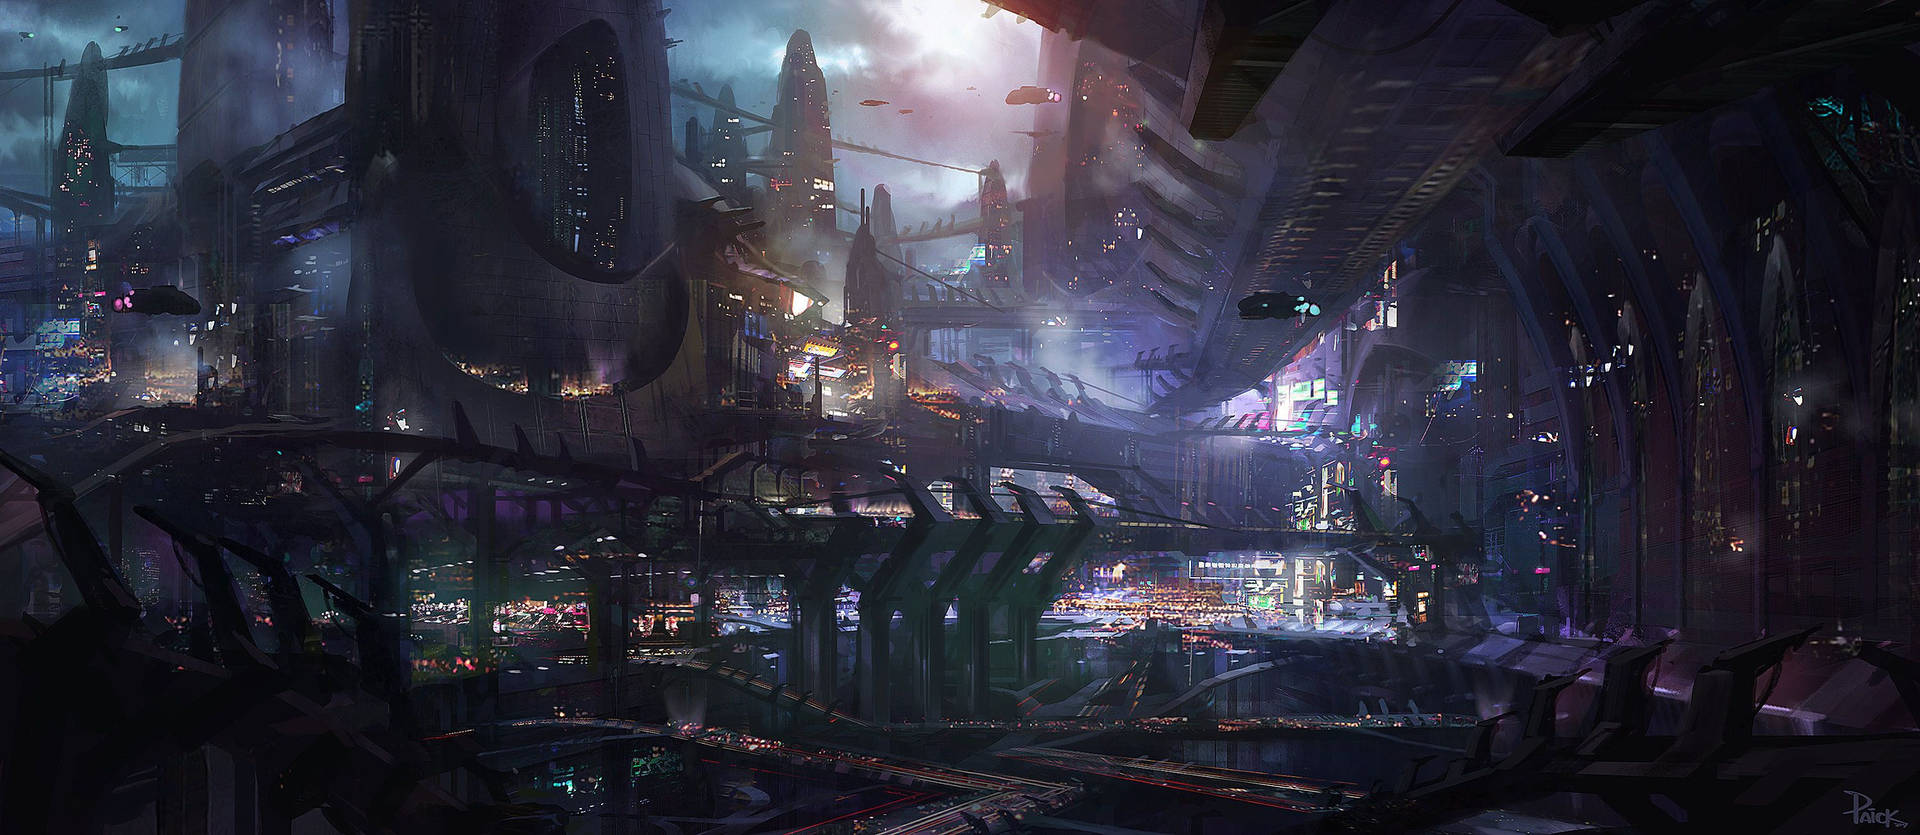 Welcome to the Science Fictional City of Cyberpunk Wallpaper